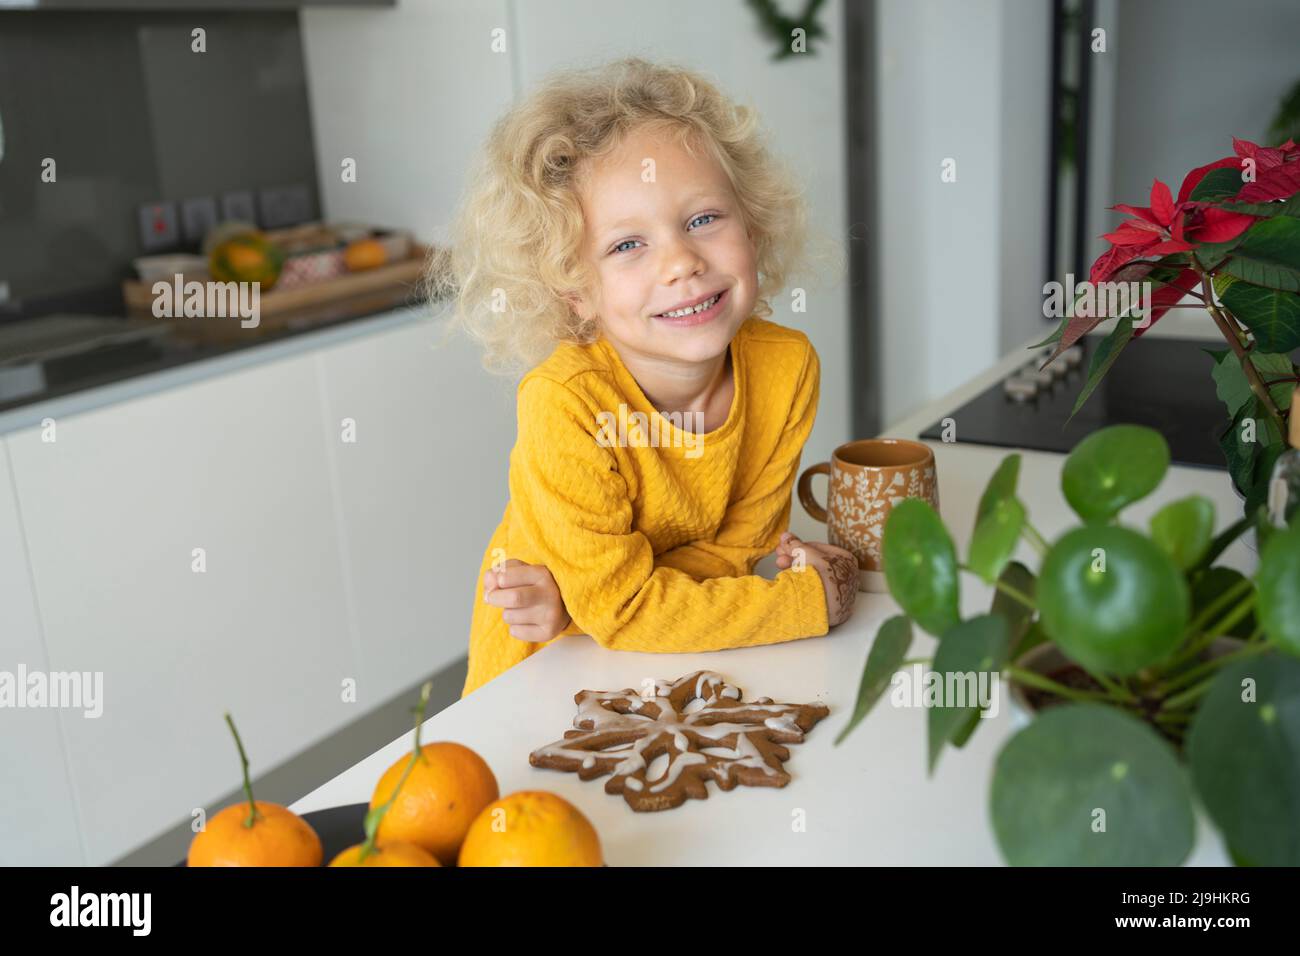 Smiling blond girl with gingerbread leaning on kitchen island Stock Photo